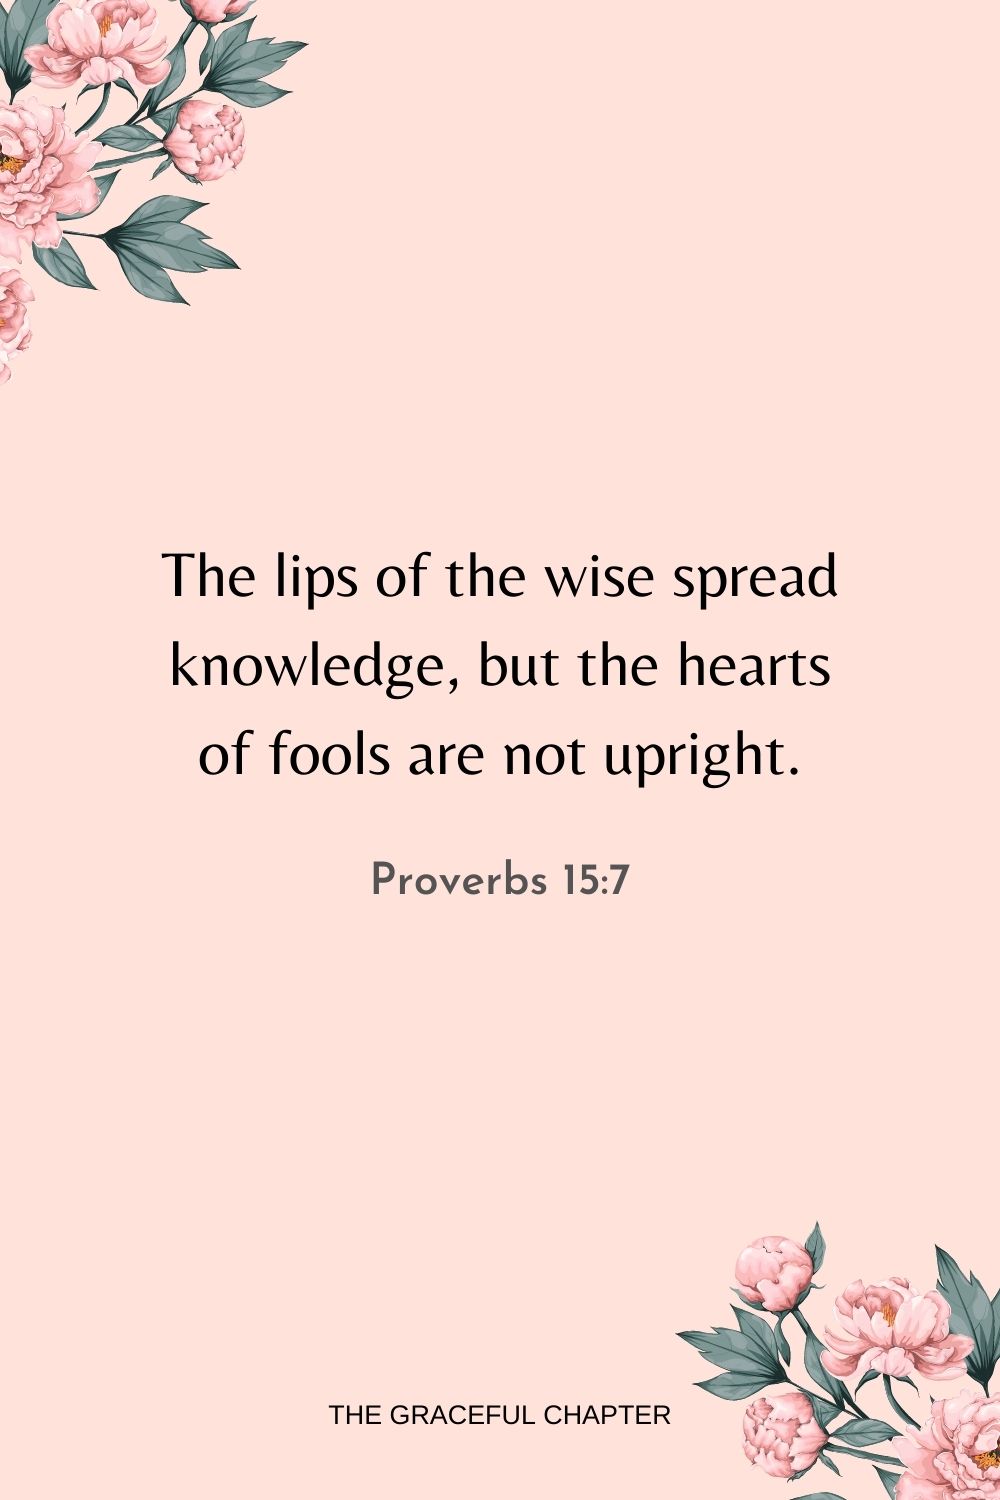 The lips of the wise spread knowledge, but the hearts of fools are not upright. Proverbs 15:7